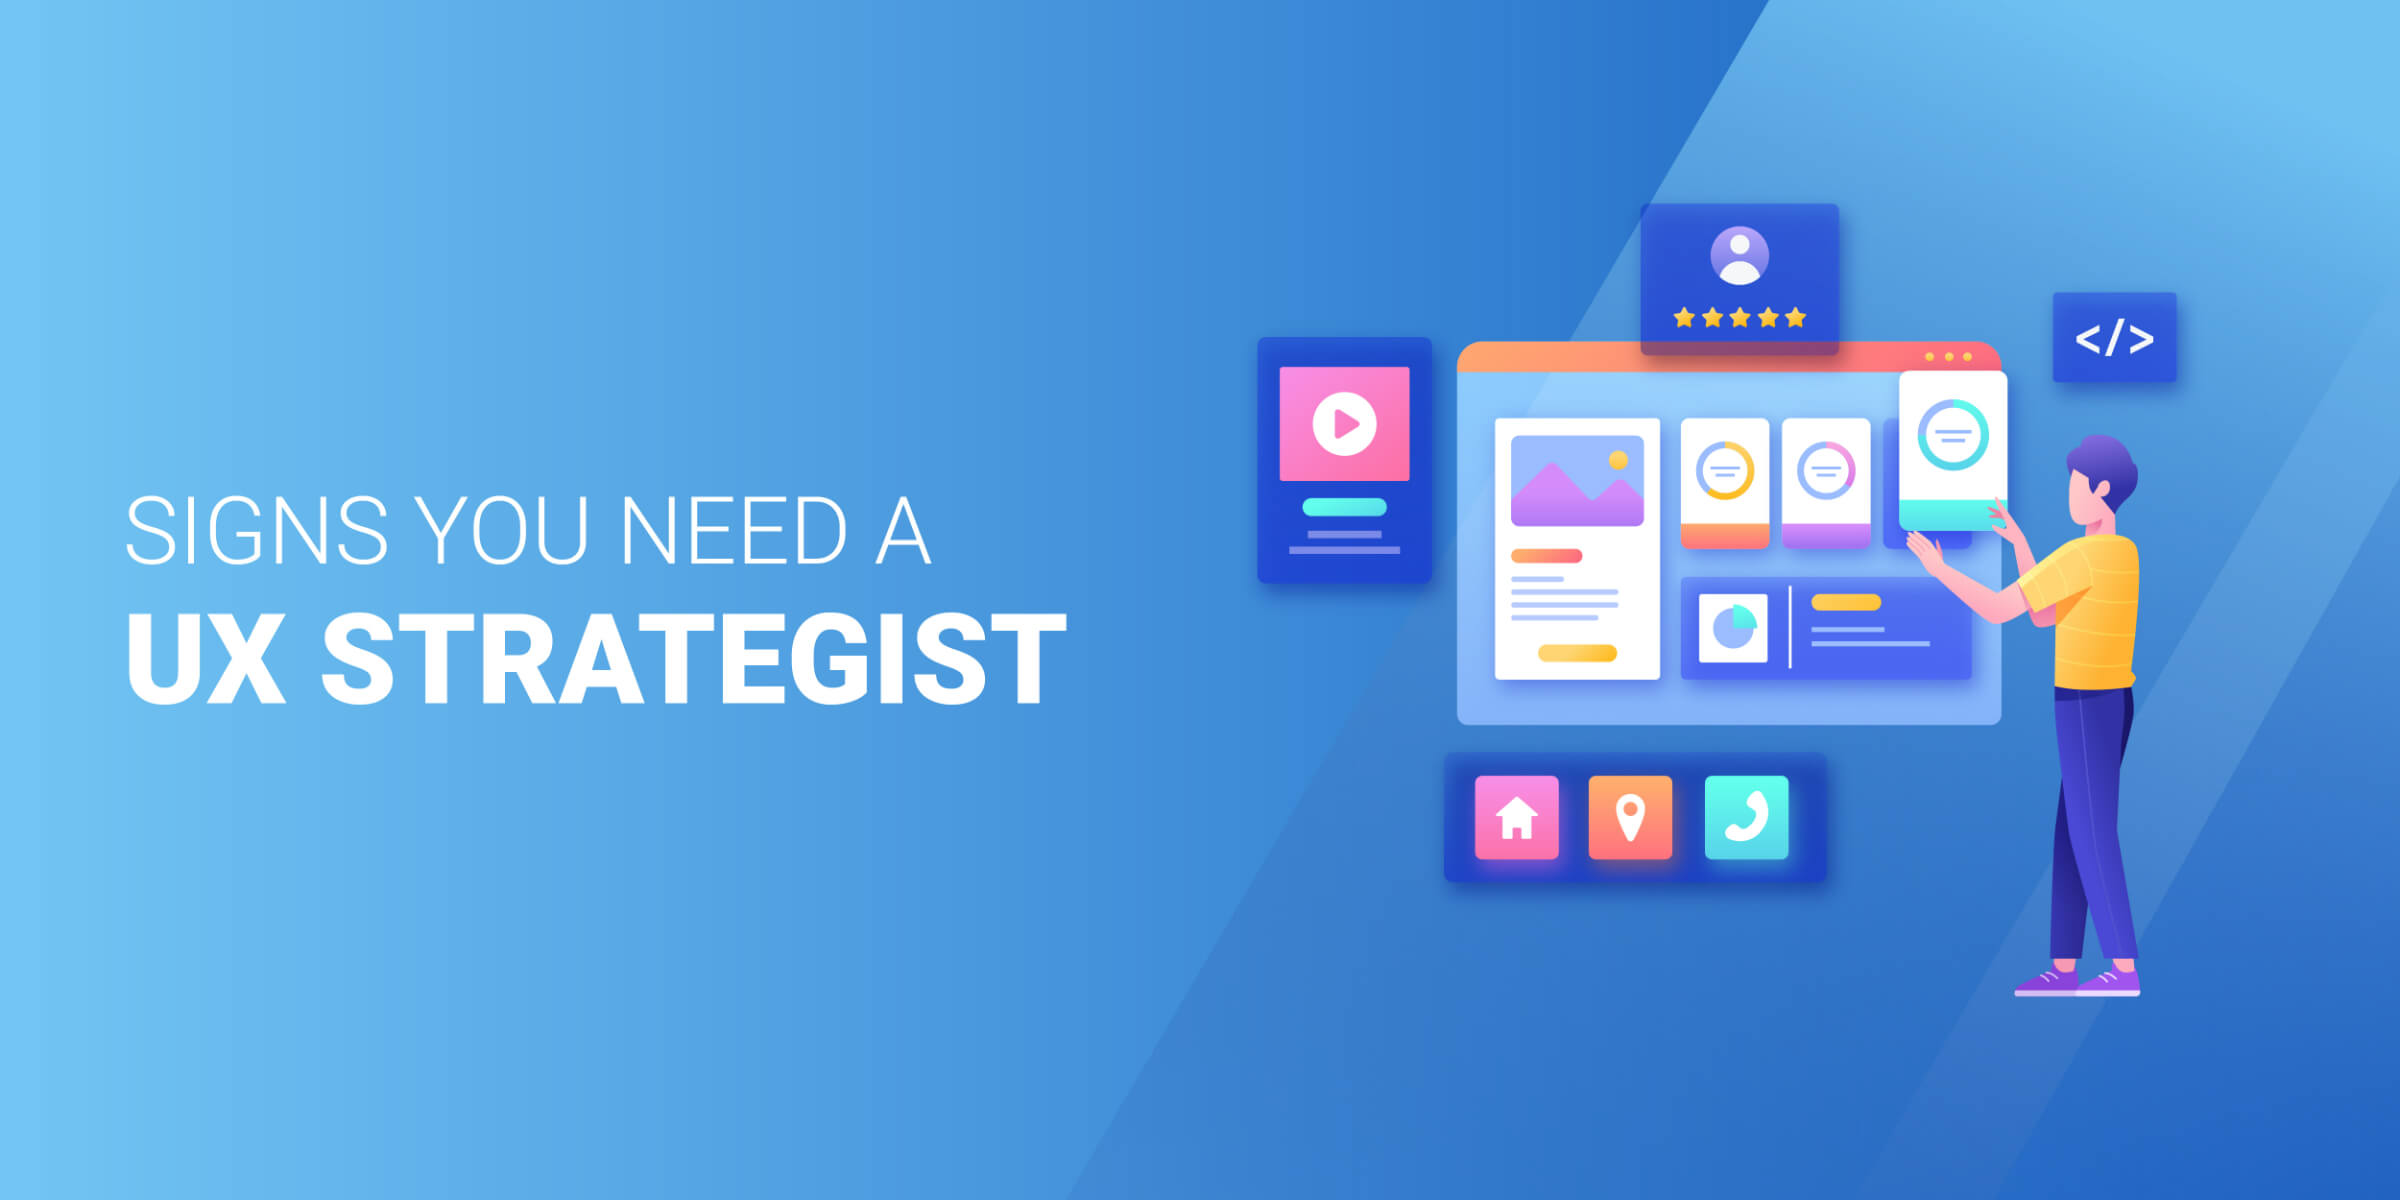 Signs You Need UX Strategist